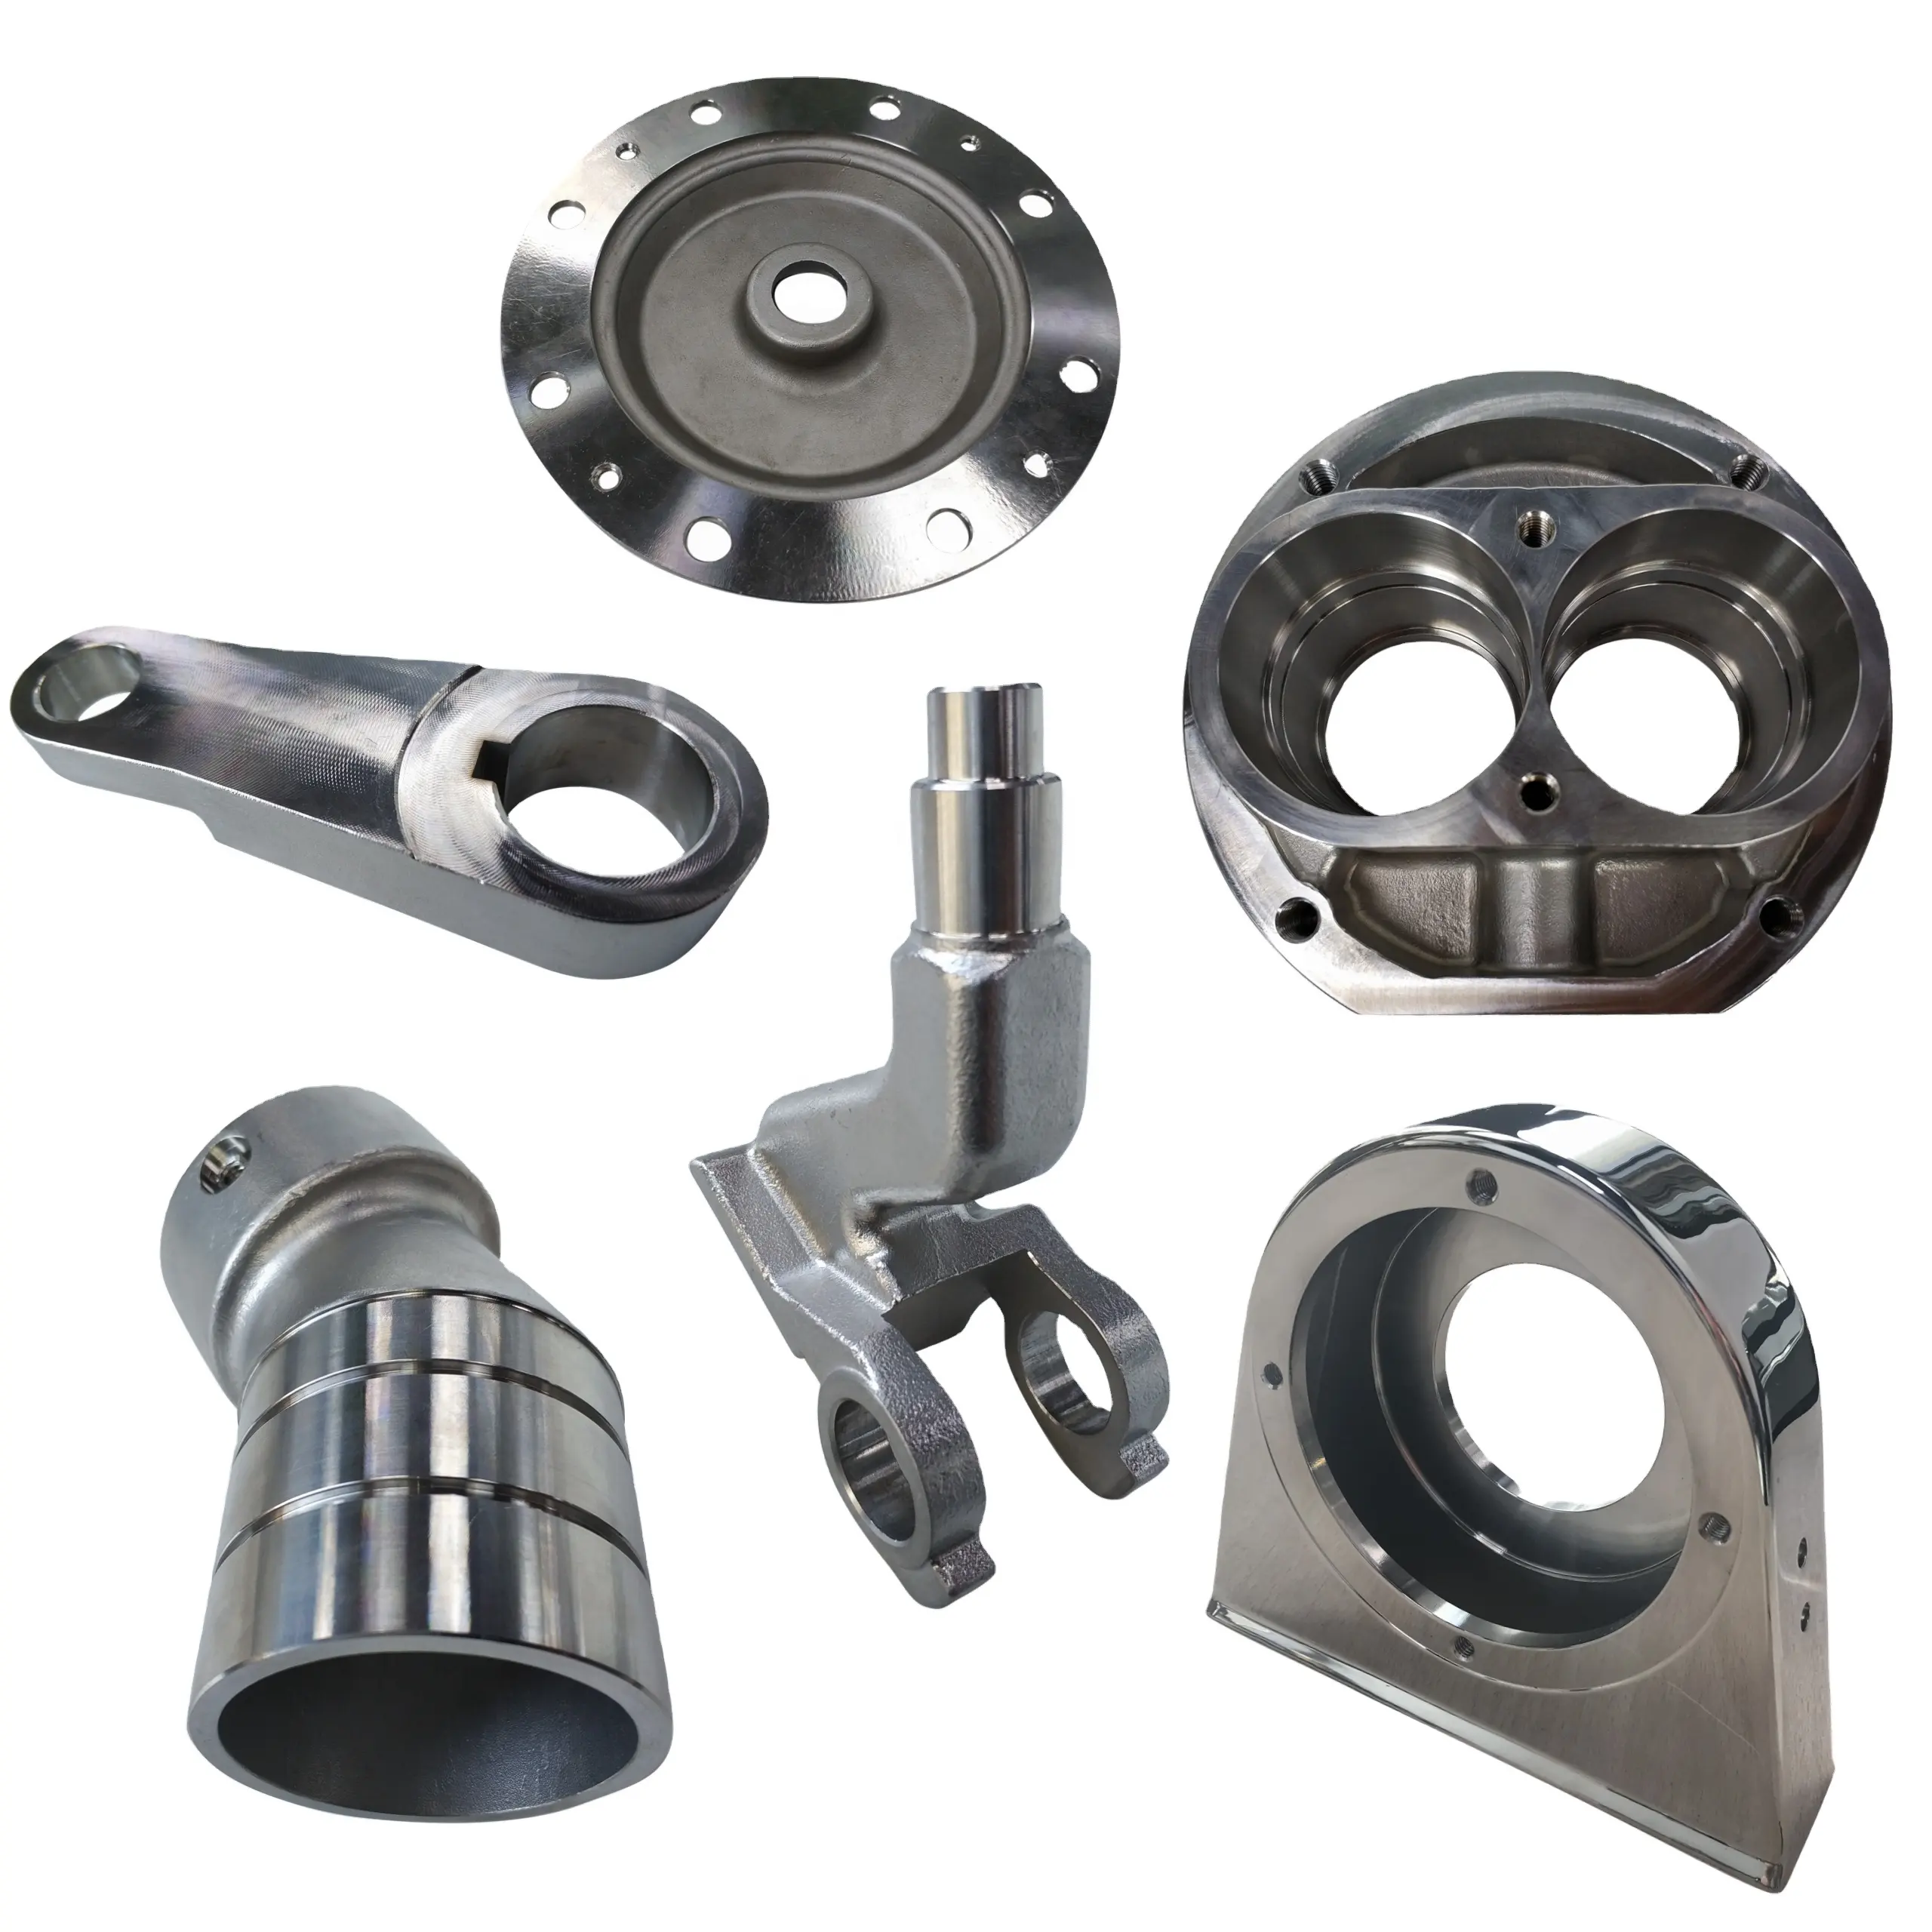 Stainless Steel/Carbon Steel/Bronze Precision Casting/Silica Sol Investment casting Service